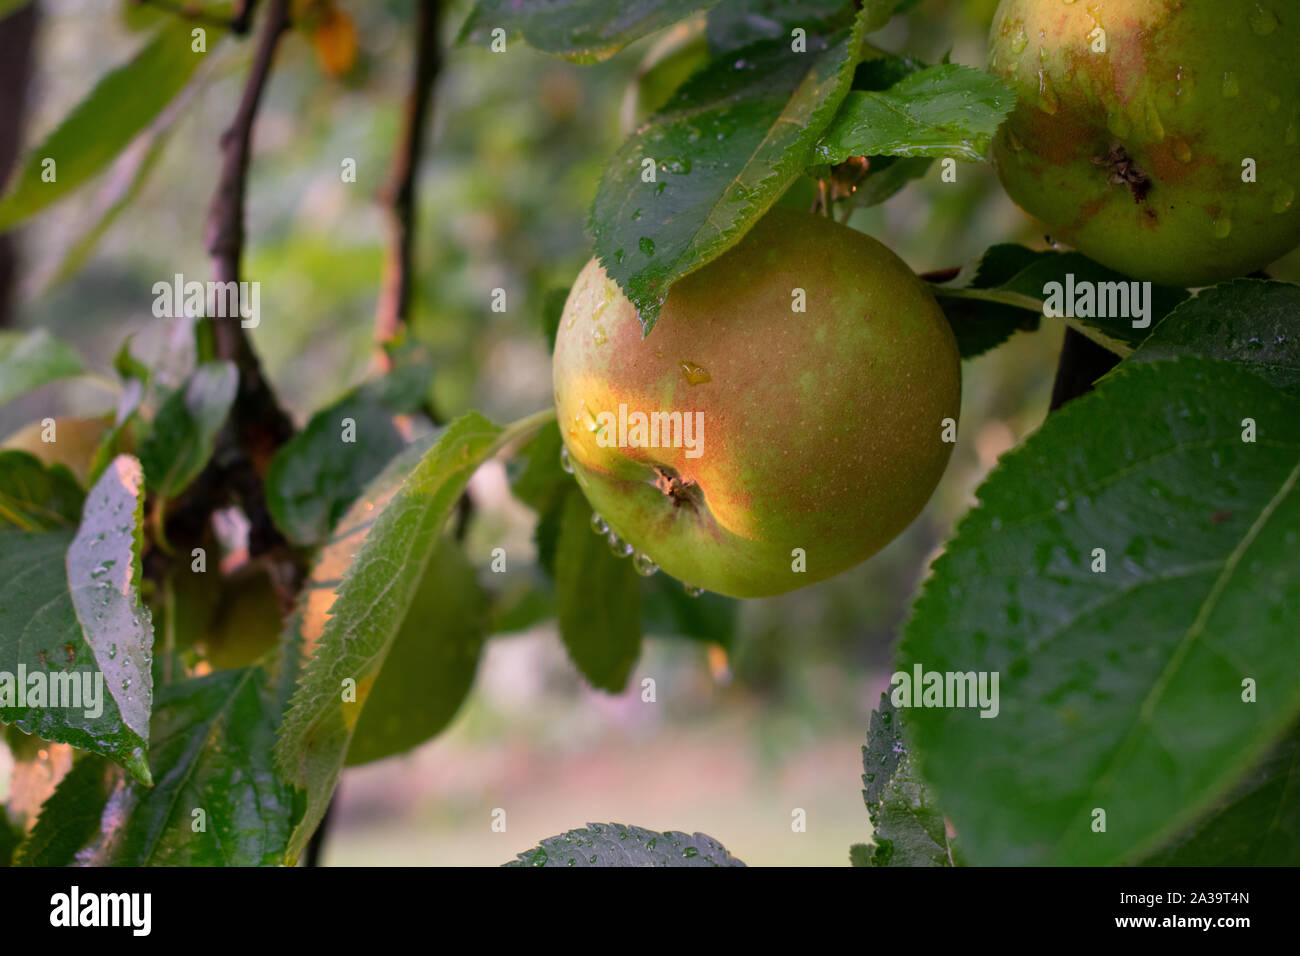 Rain drops on green brown apple hanging from a tree at sunset. Stock Photo